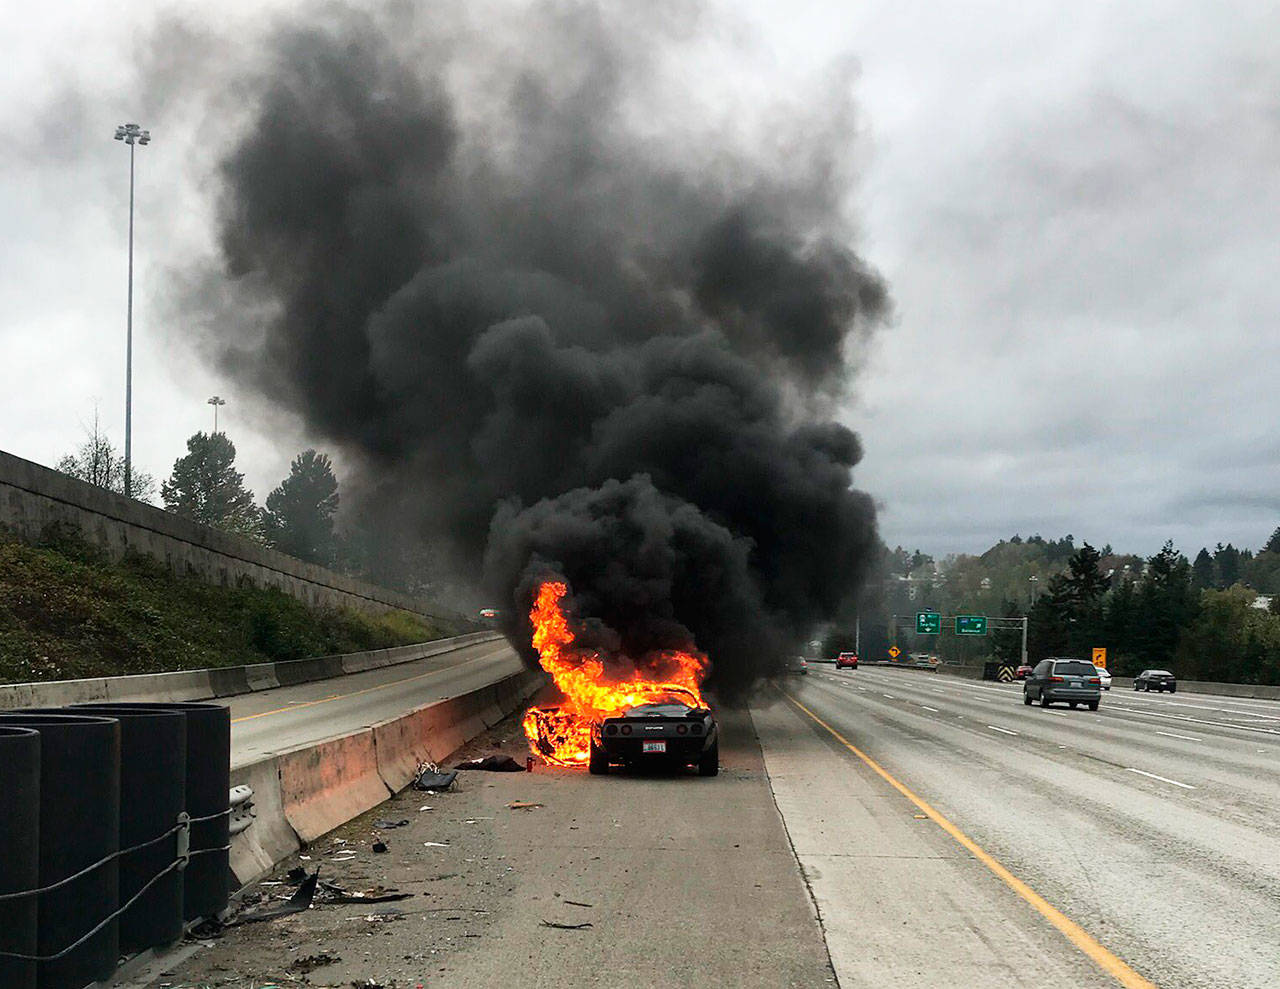 A Corvette catches fire Sunday, Nov. 1 along Interstate 5 in SeaTac. COURTESY PHOTO, Puget Sound Fire